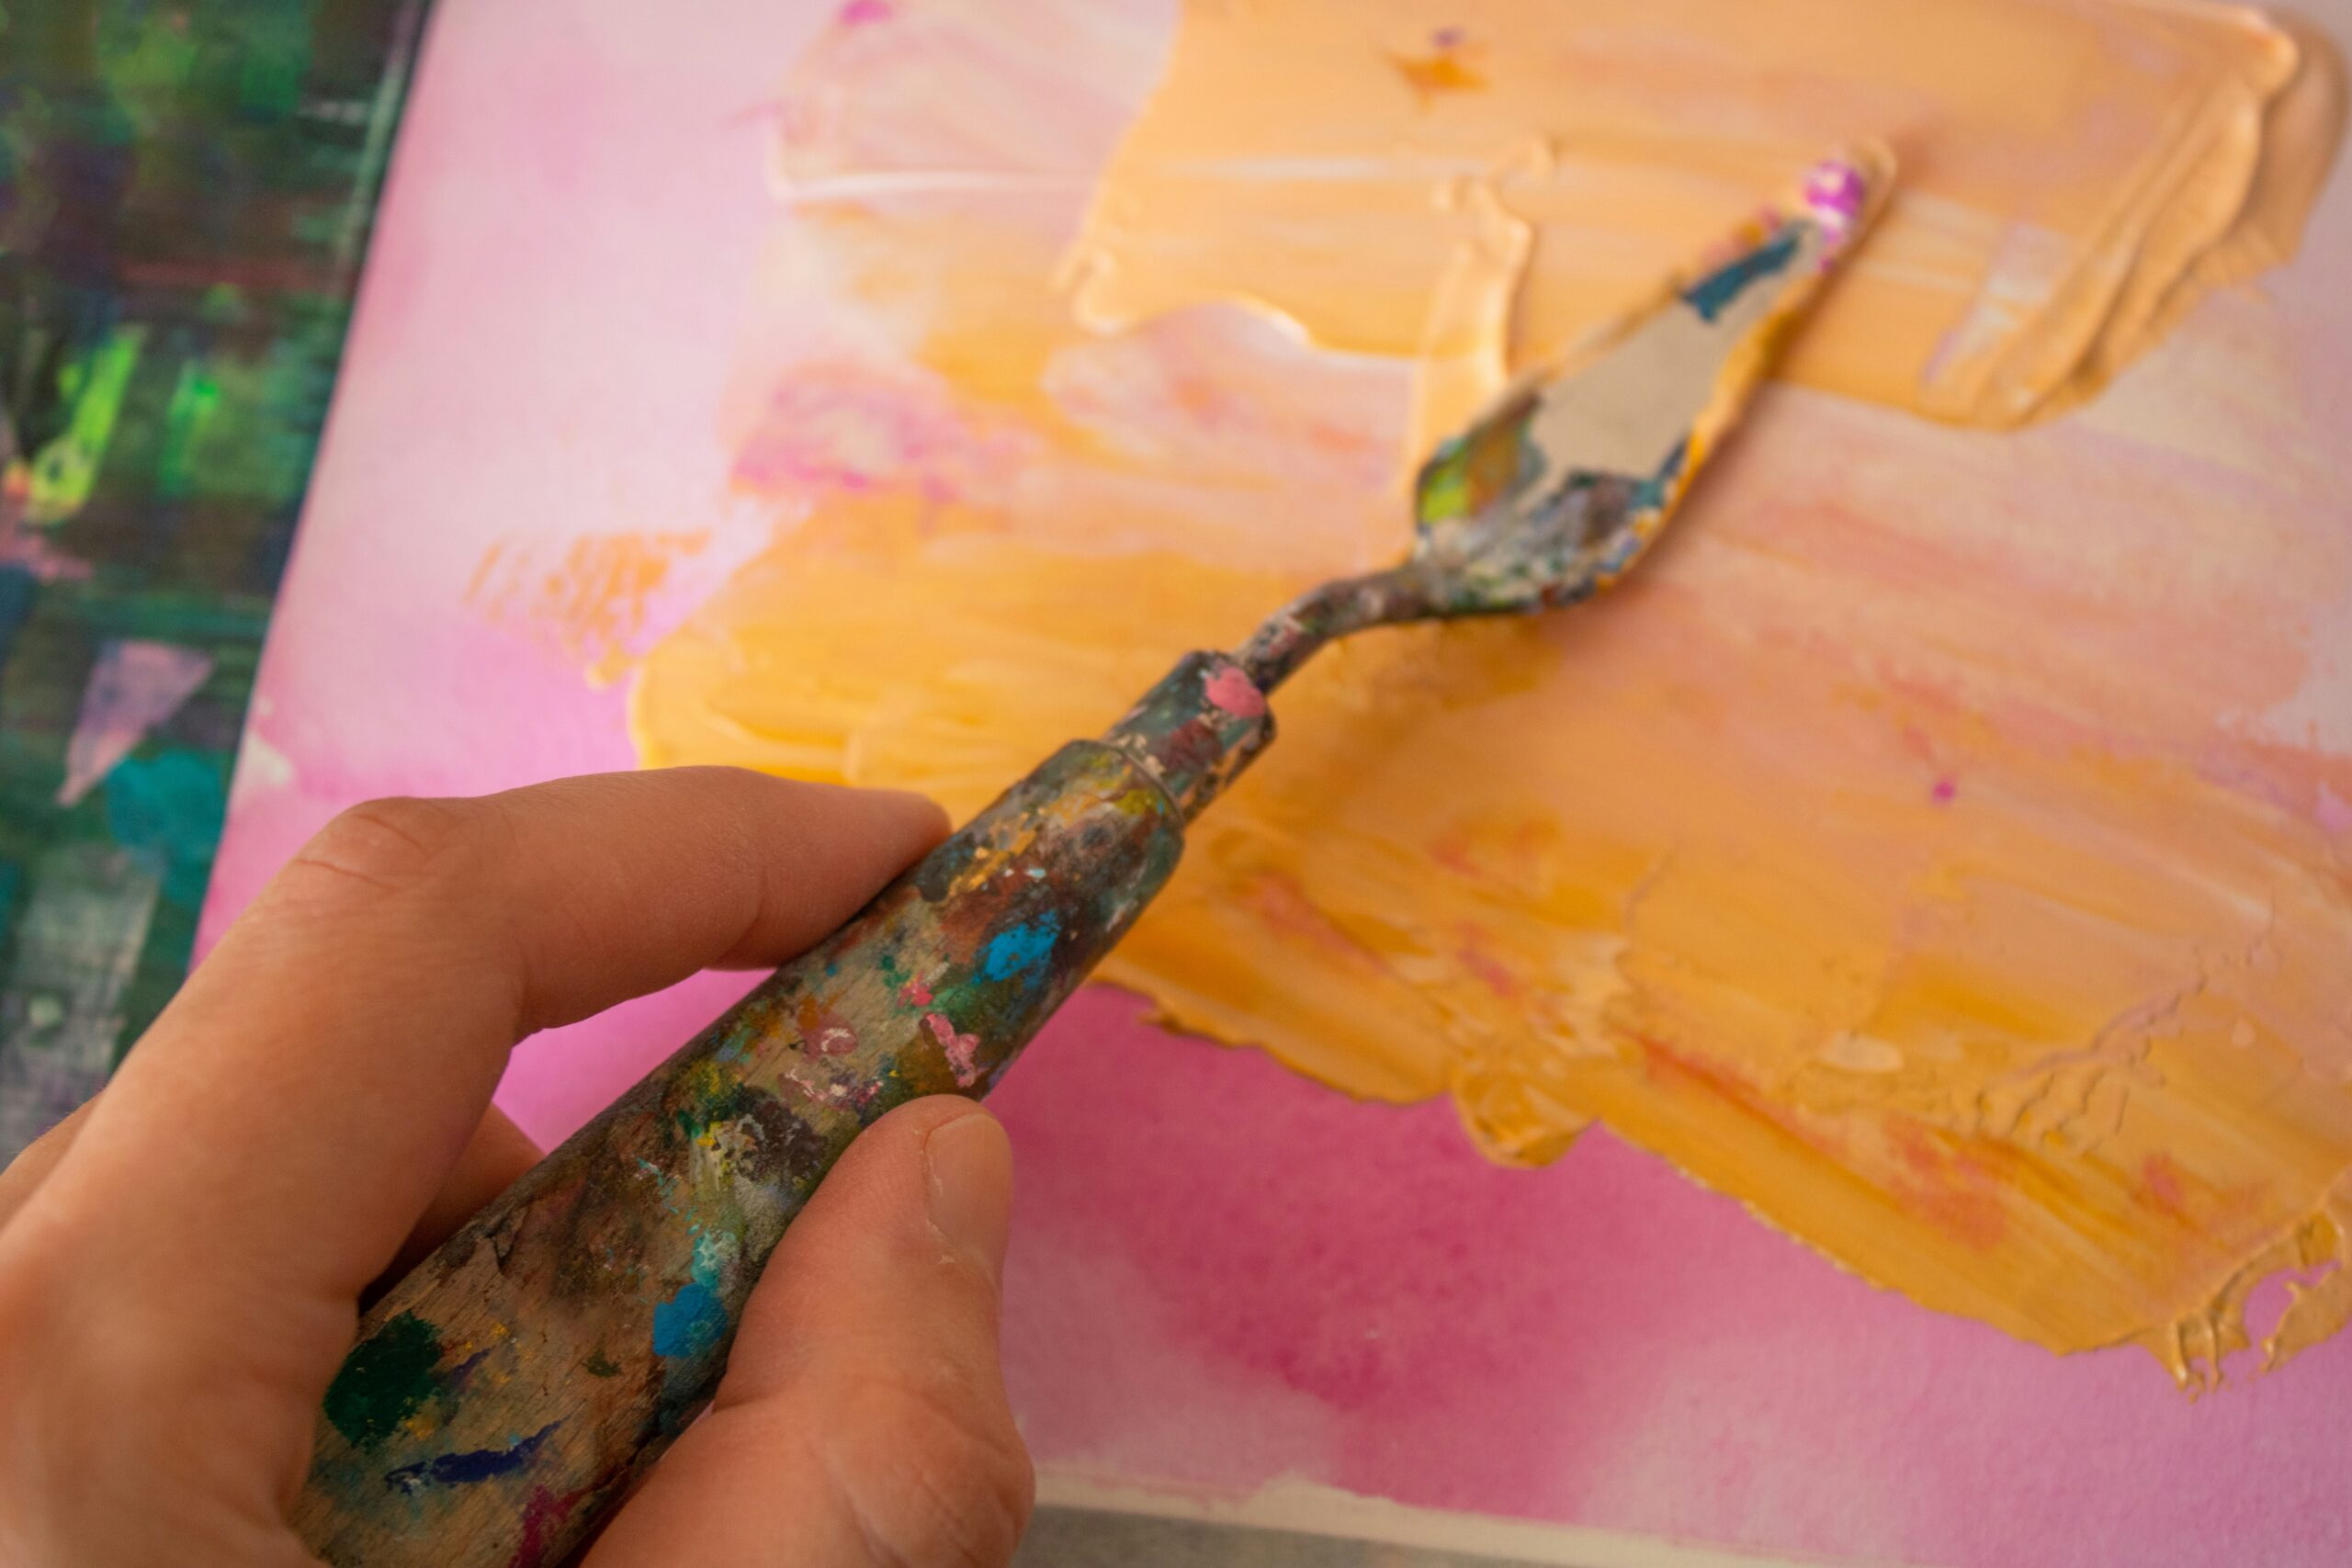 Close-up of a left hand hoding an artist's palette knife on a can